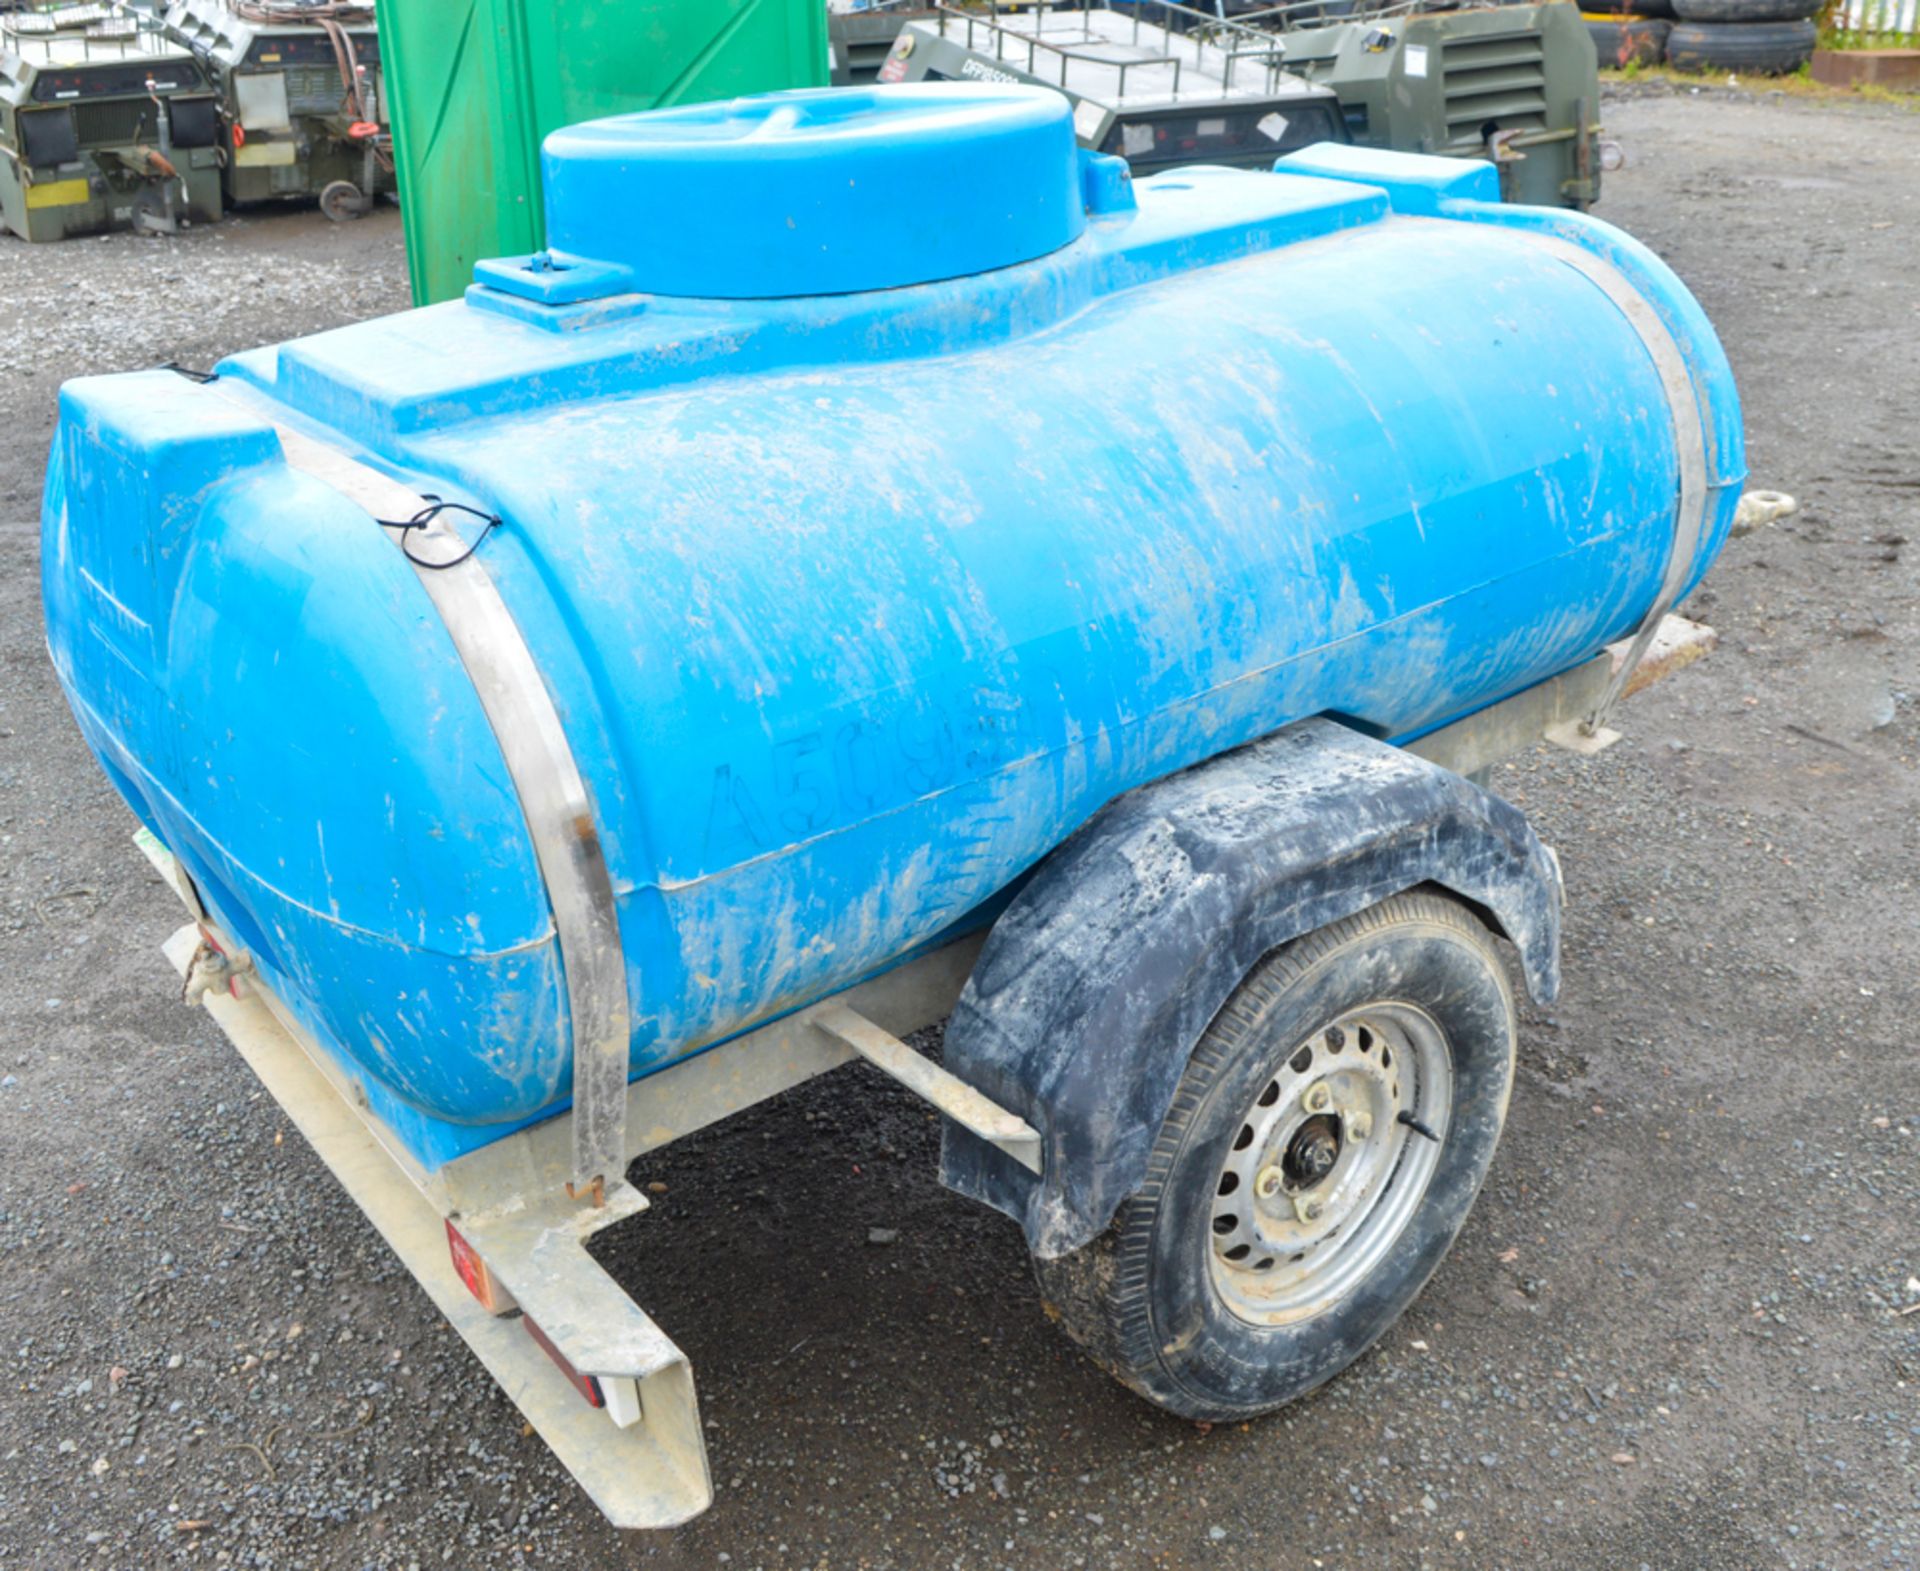 Trailer Engineering 250 gallon fast tow water bowser A509561 - Image 2 of 2